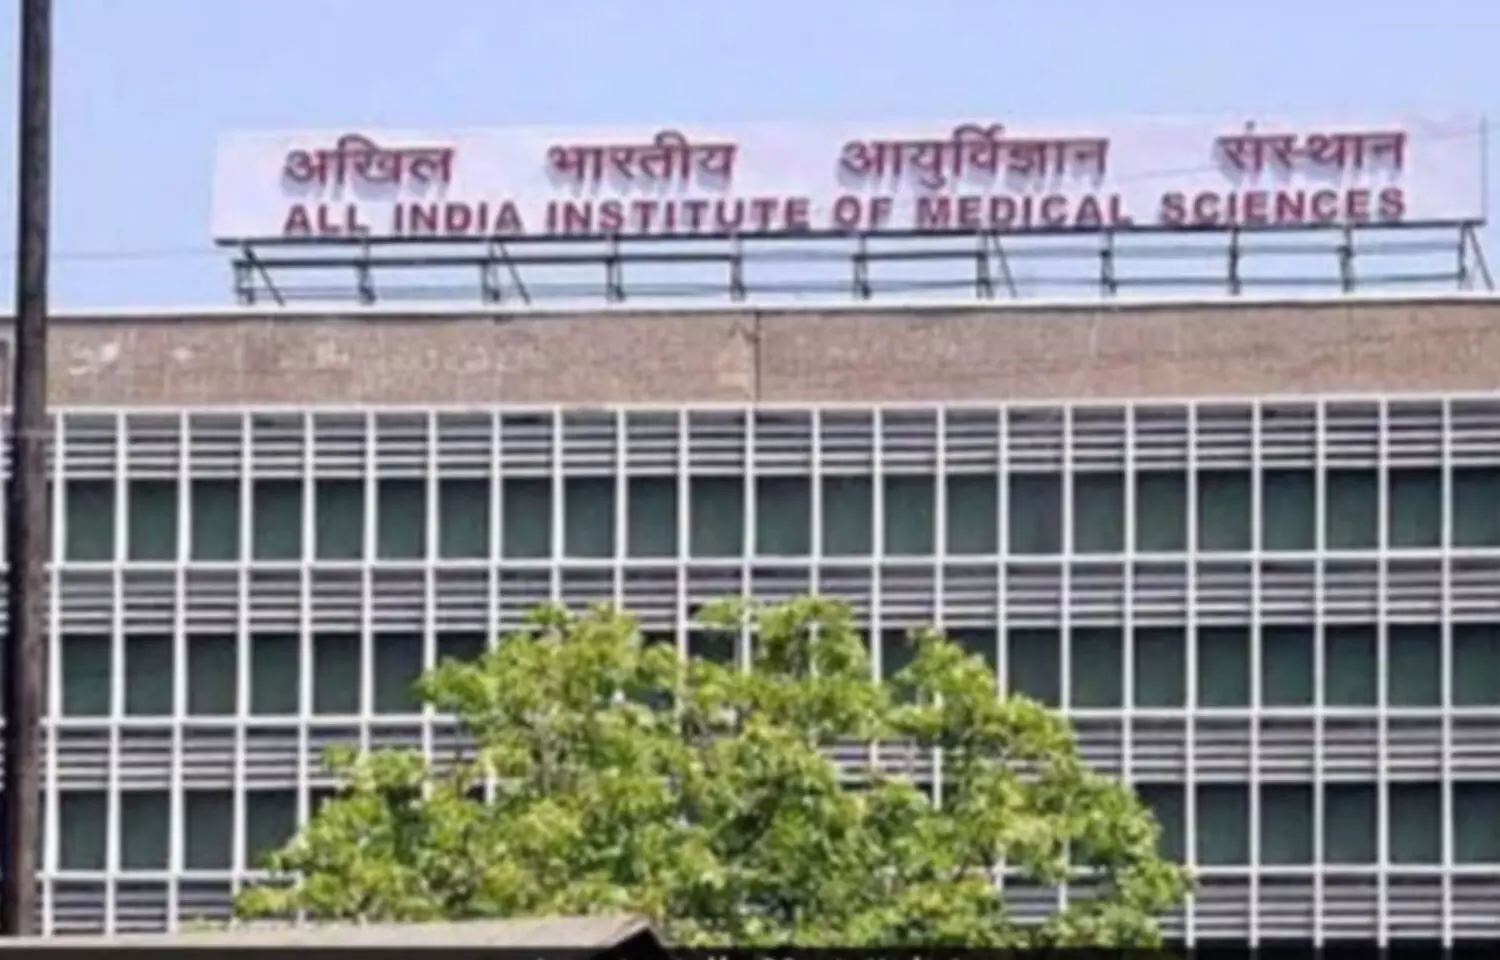 MSc Nursing, MSc Admissions at AIIMS: 62 seats available for open round counselling, view all details here